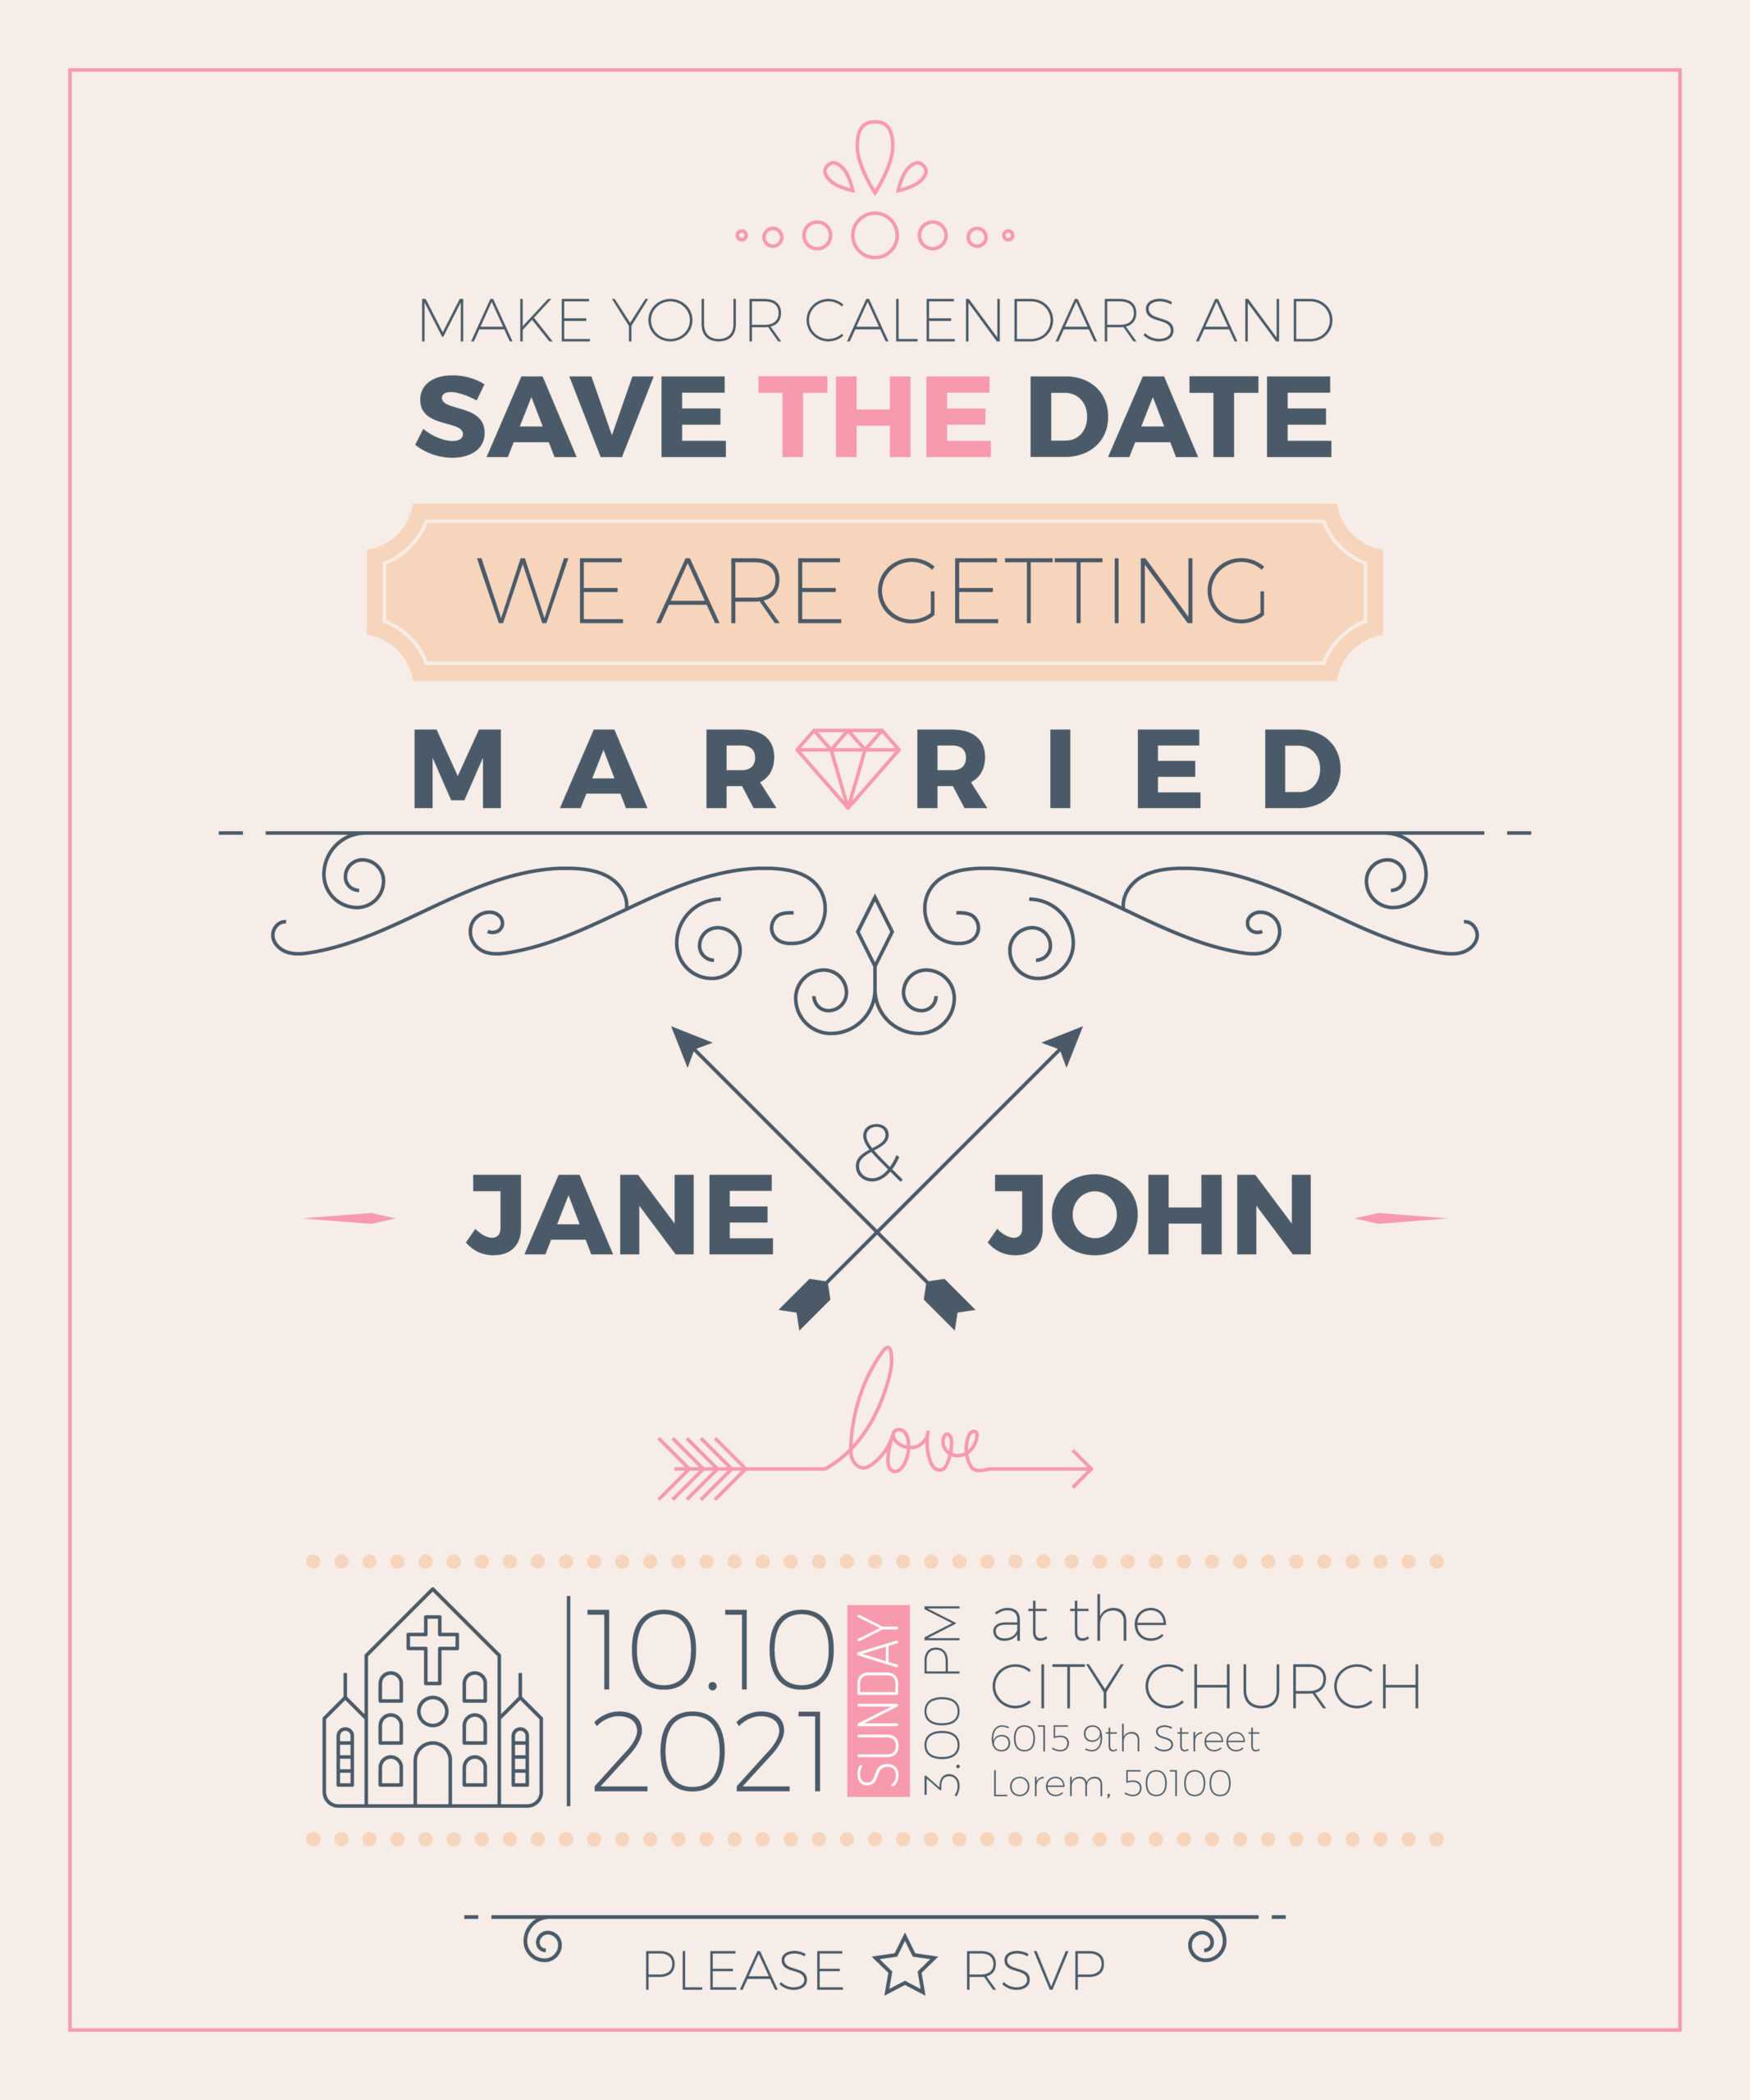 Vintage Wedding Invitation Card Template - Download Free Pertaining To Church Wedding Invitation Card Template